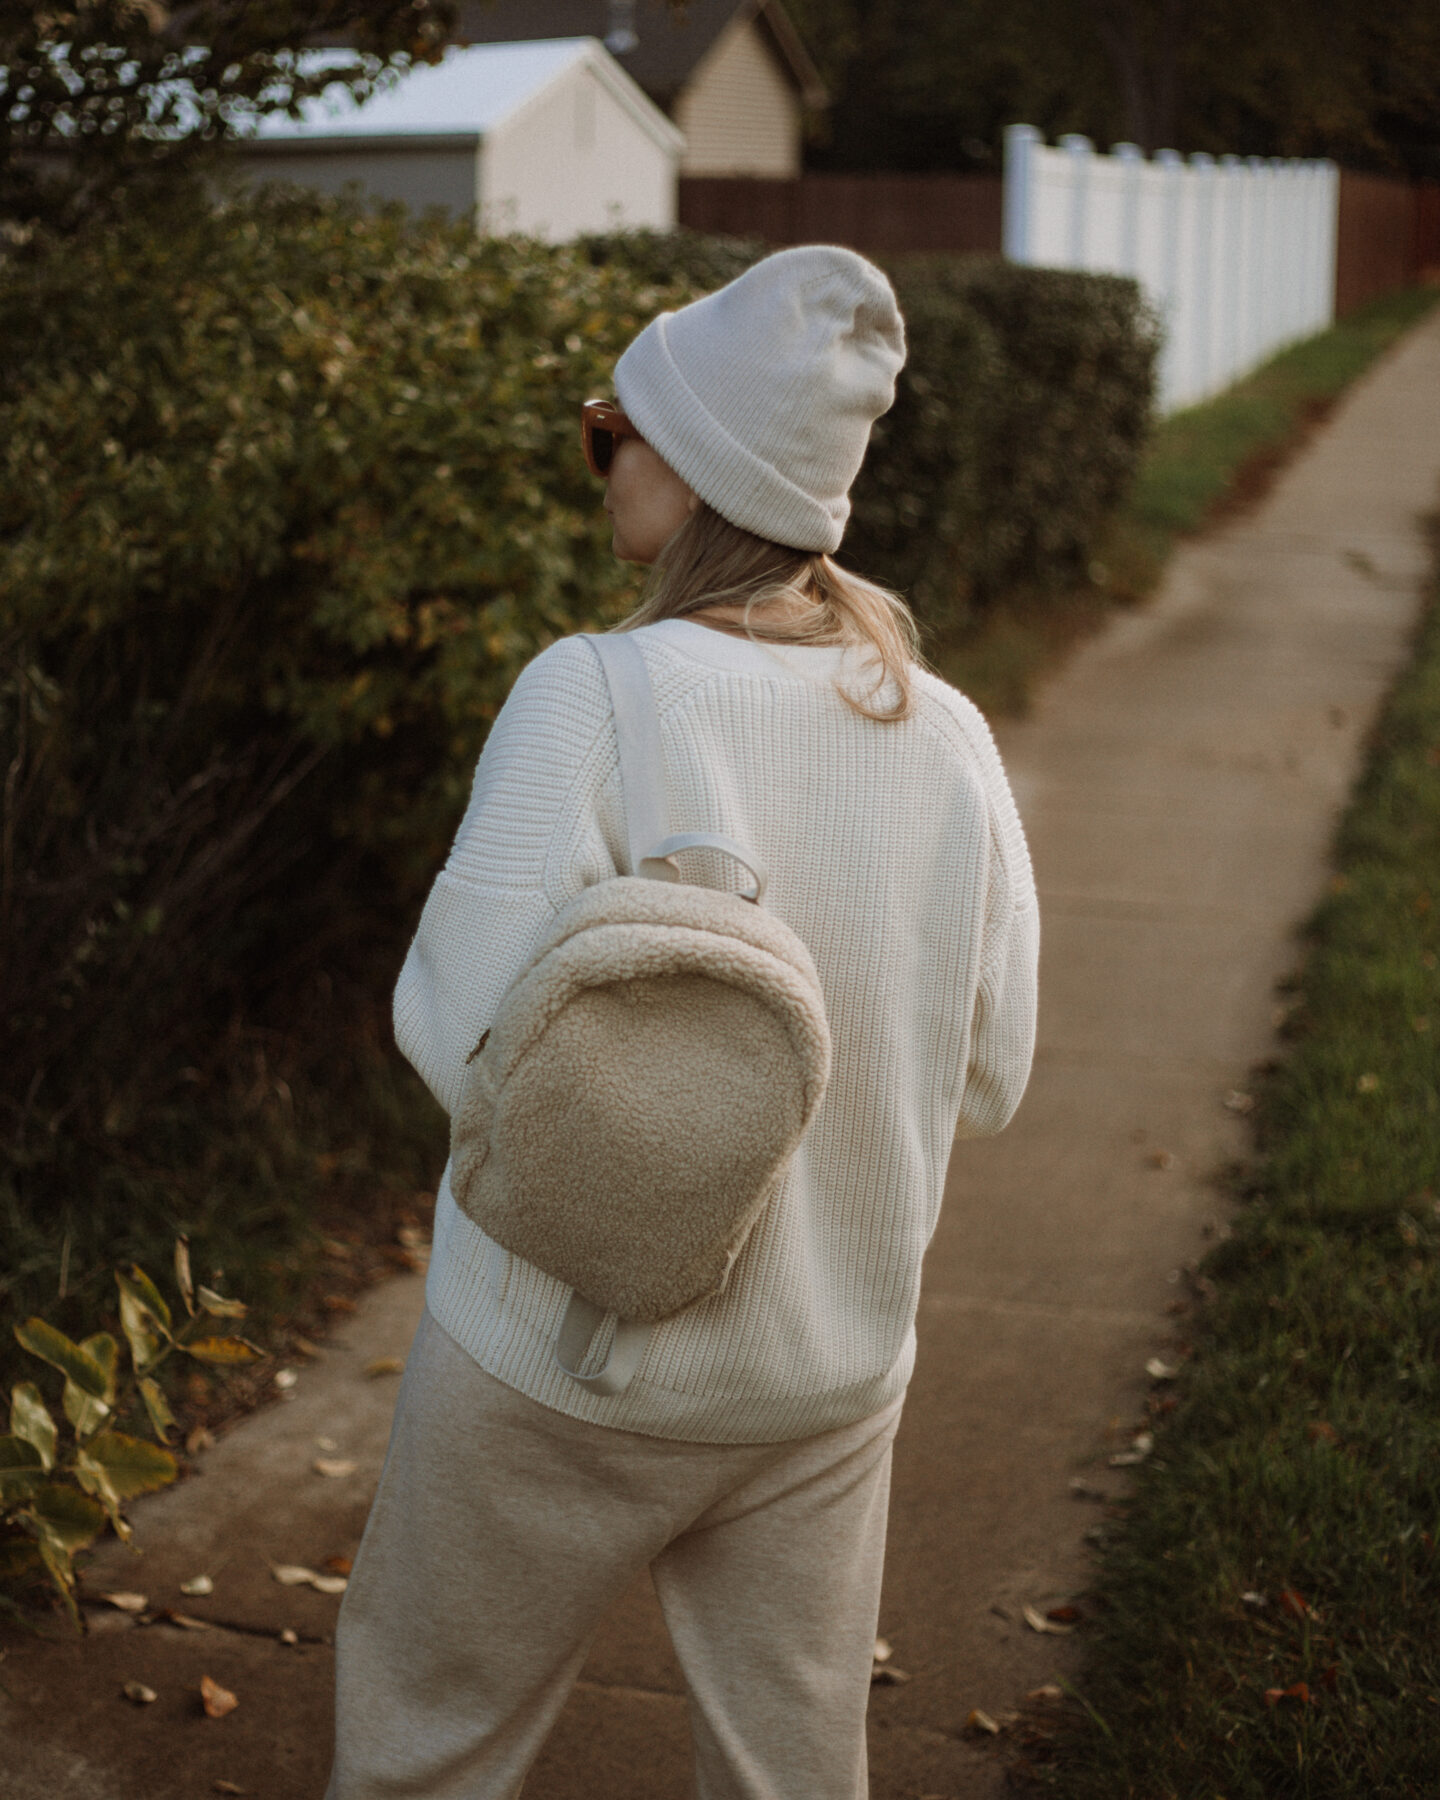 Karin Emily wears the Tradlands Shelter Cardigan, a J Crew Wool Jumpsuit and Sneakers and a Sherpa Backpack